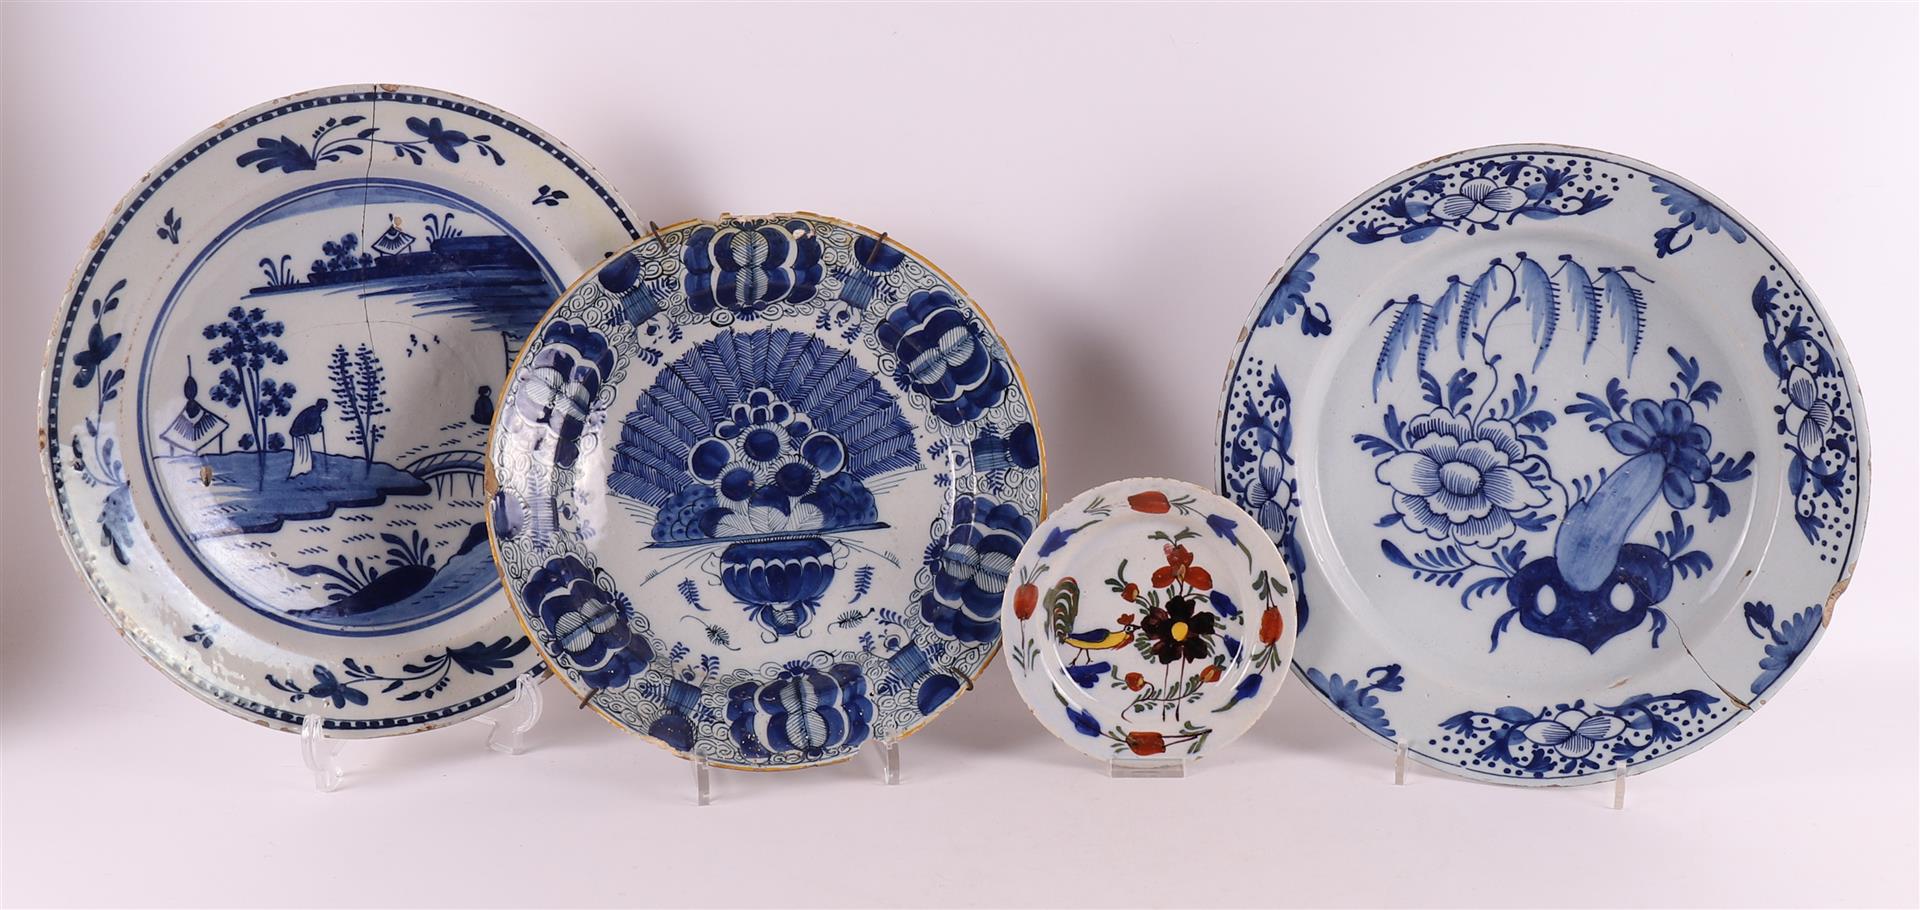 A series of seven various Delft earthenware dishes, 18th century.